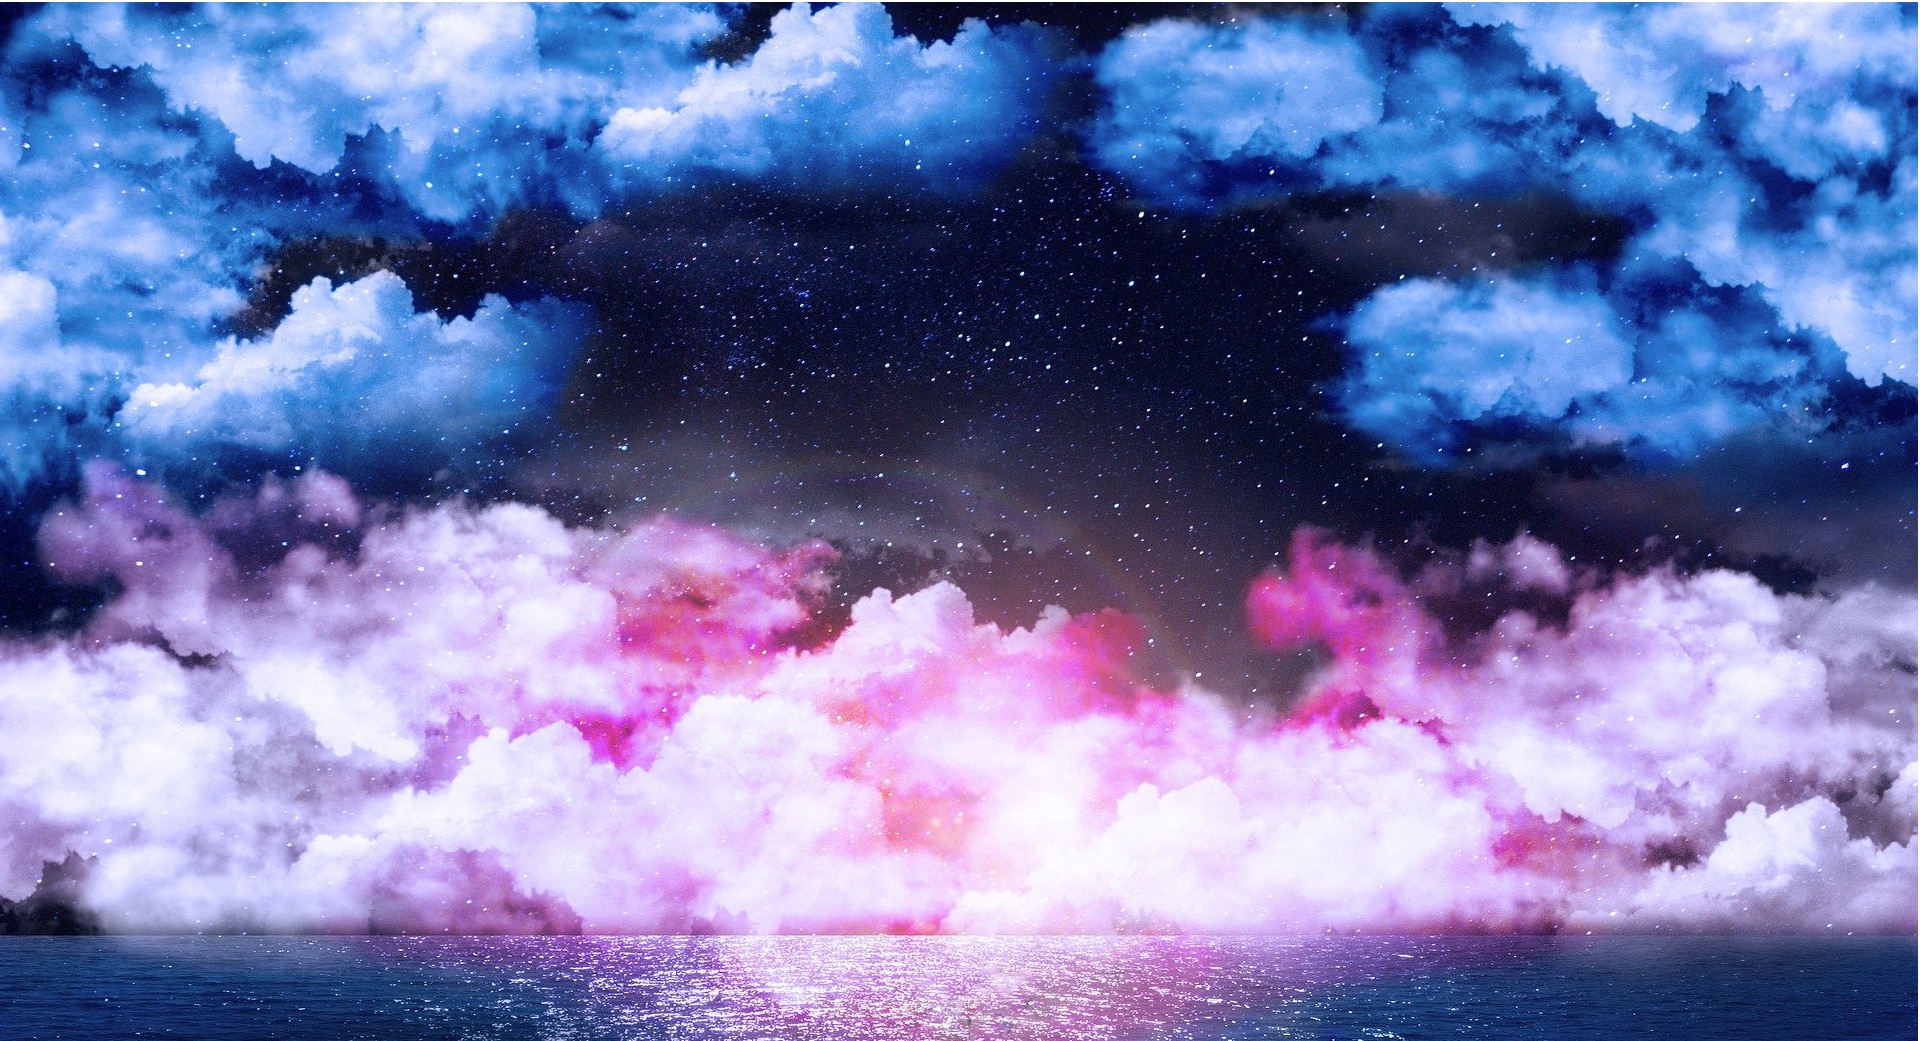 pink clouds on endless water reaching up to the starry sky